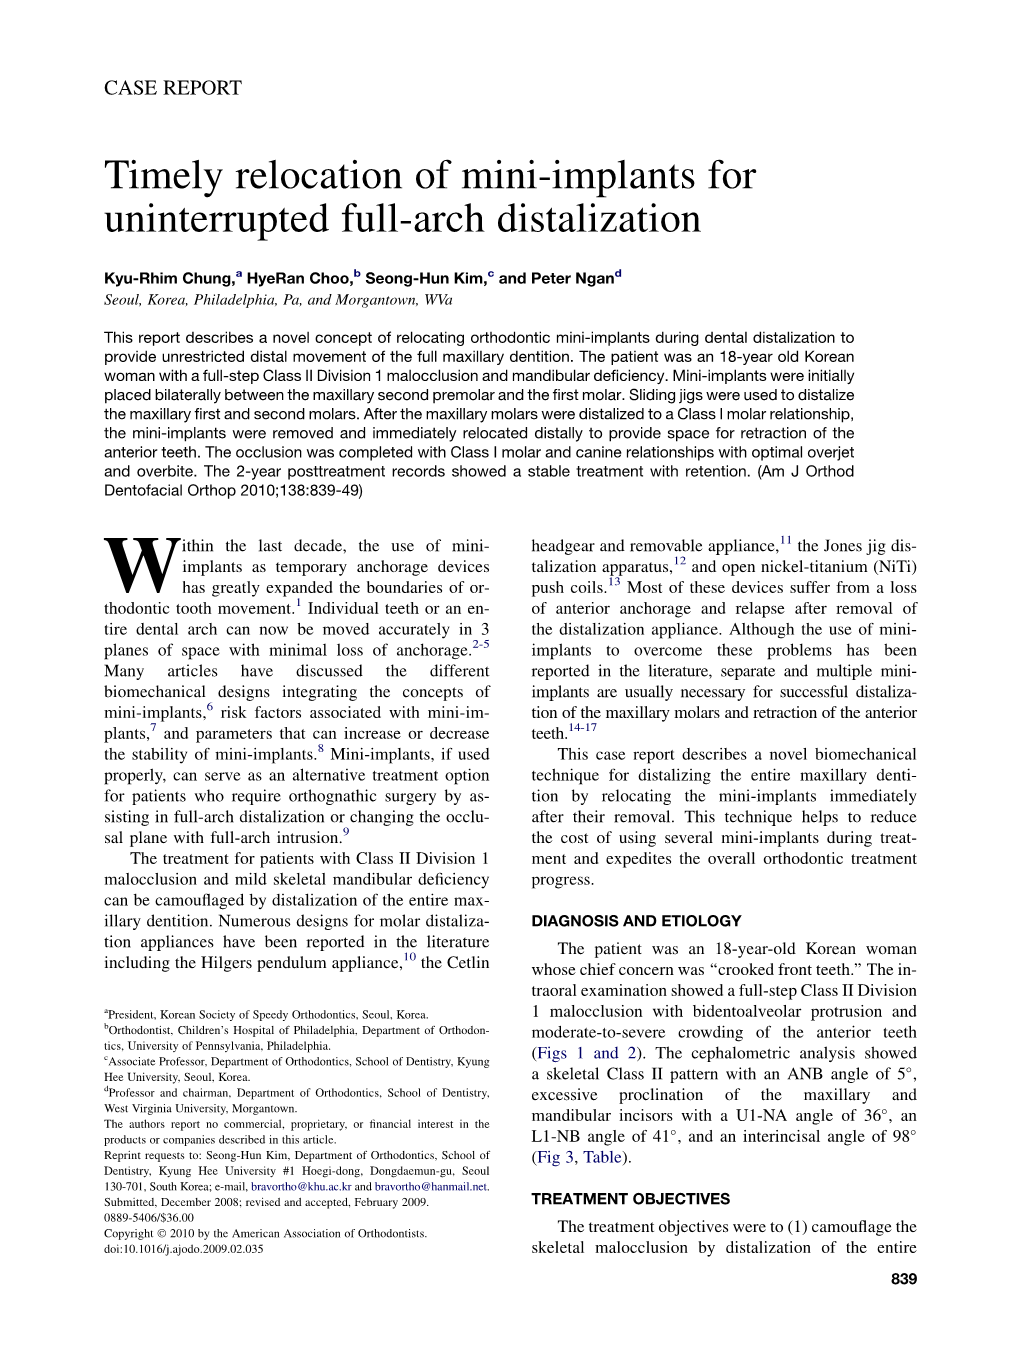 Timely Relocation of Mini-Implants for Uninterrupted Full-Arch Distalization